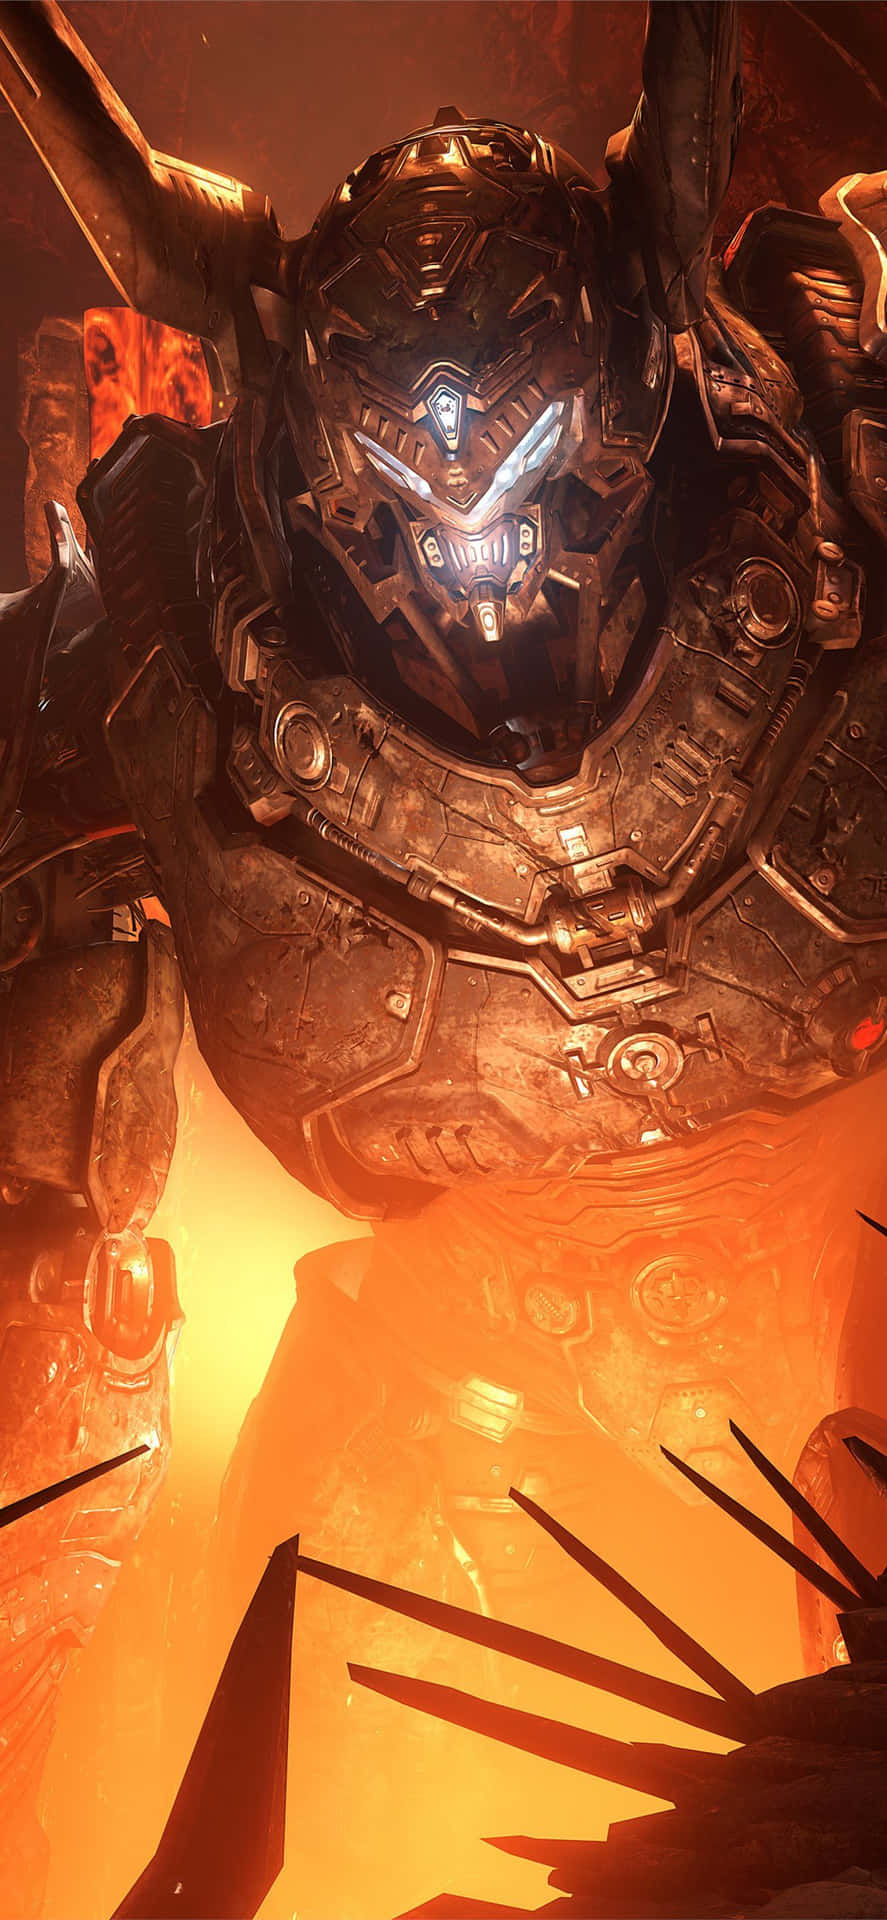 Experience the gruesome world of Doom Eternal on your Iphone Wallpaper